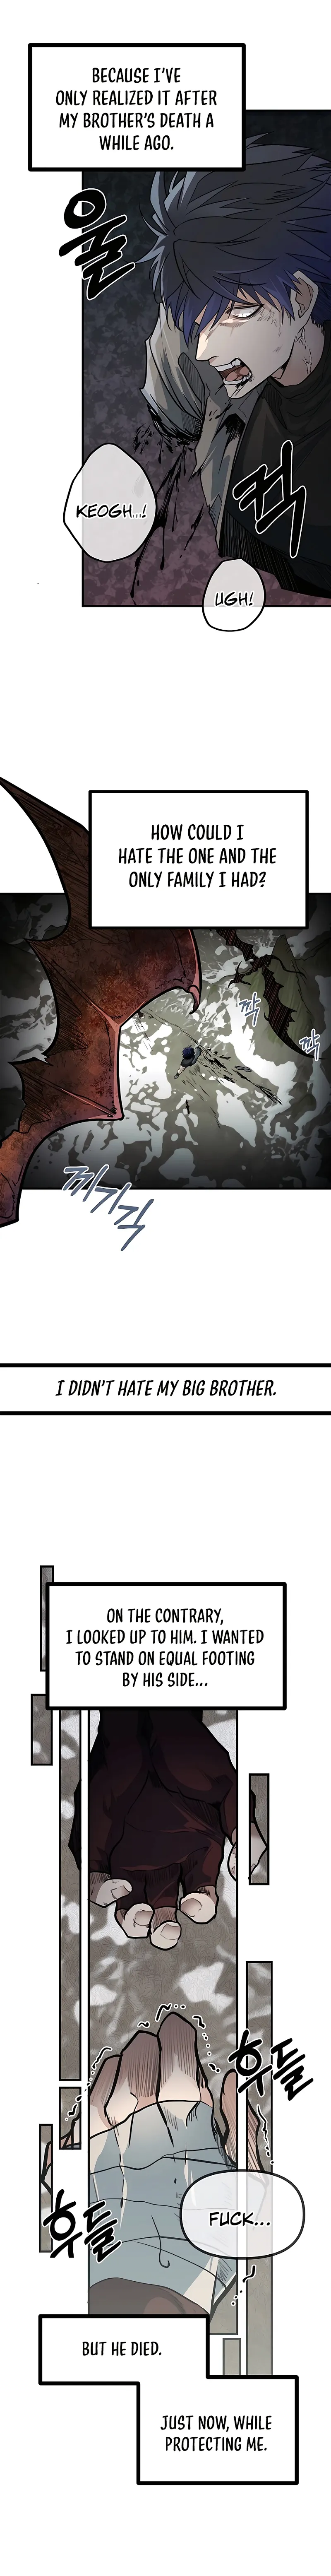 My Little Brother Is The Academy’s Hotshot Chapter 0 page 5